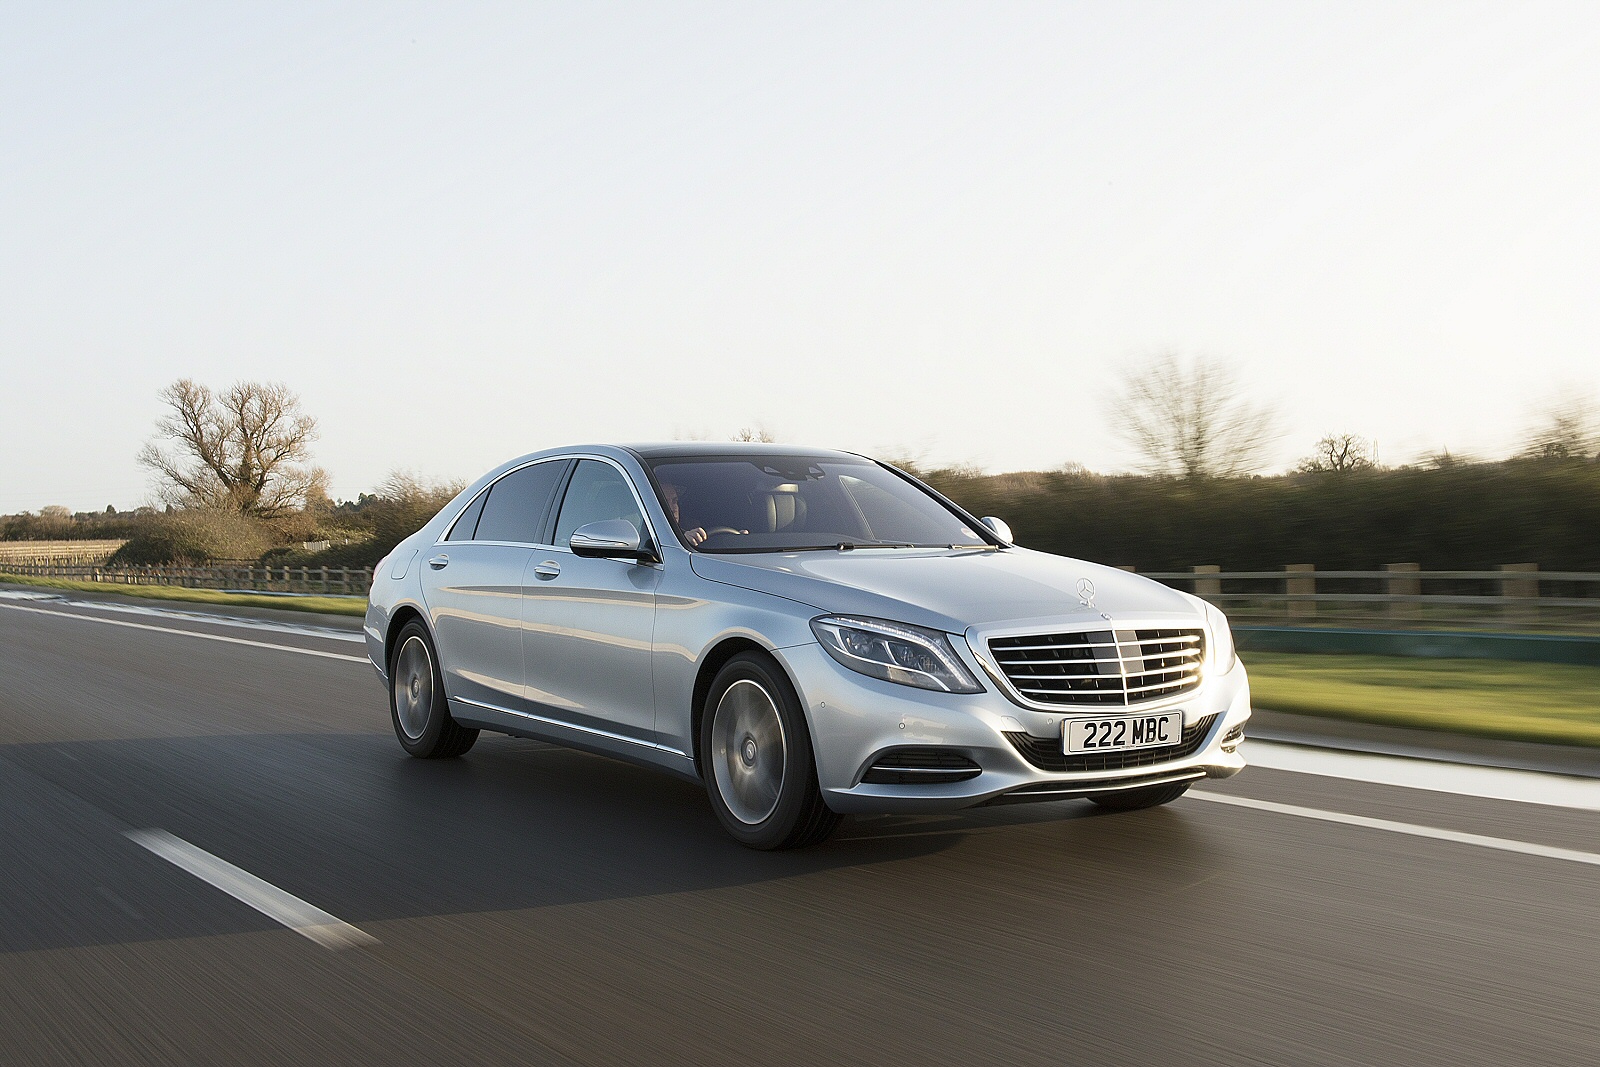 Front view of 2014 Mercedes-Benz S-Class Hybrid 